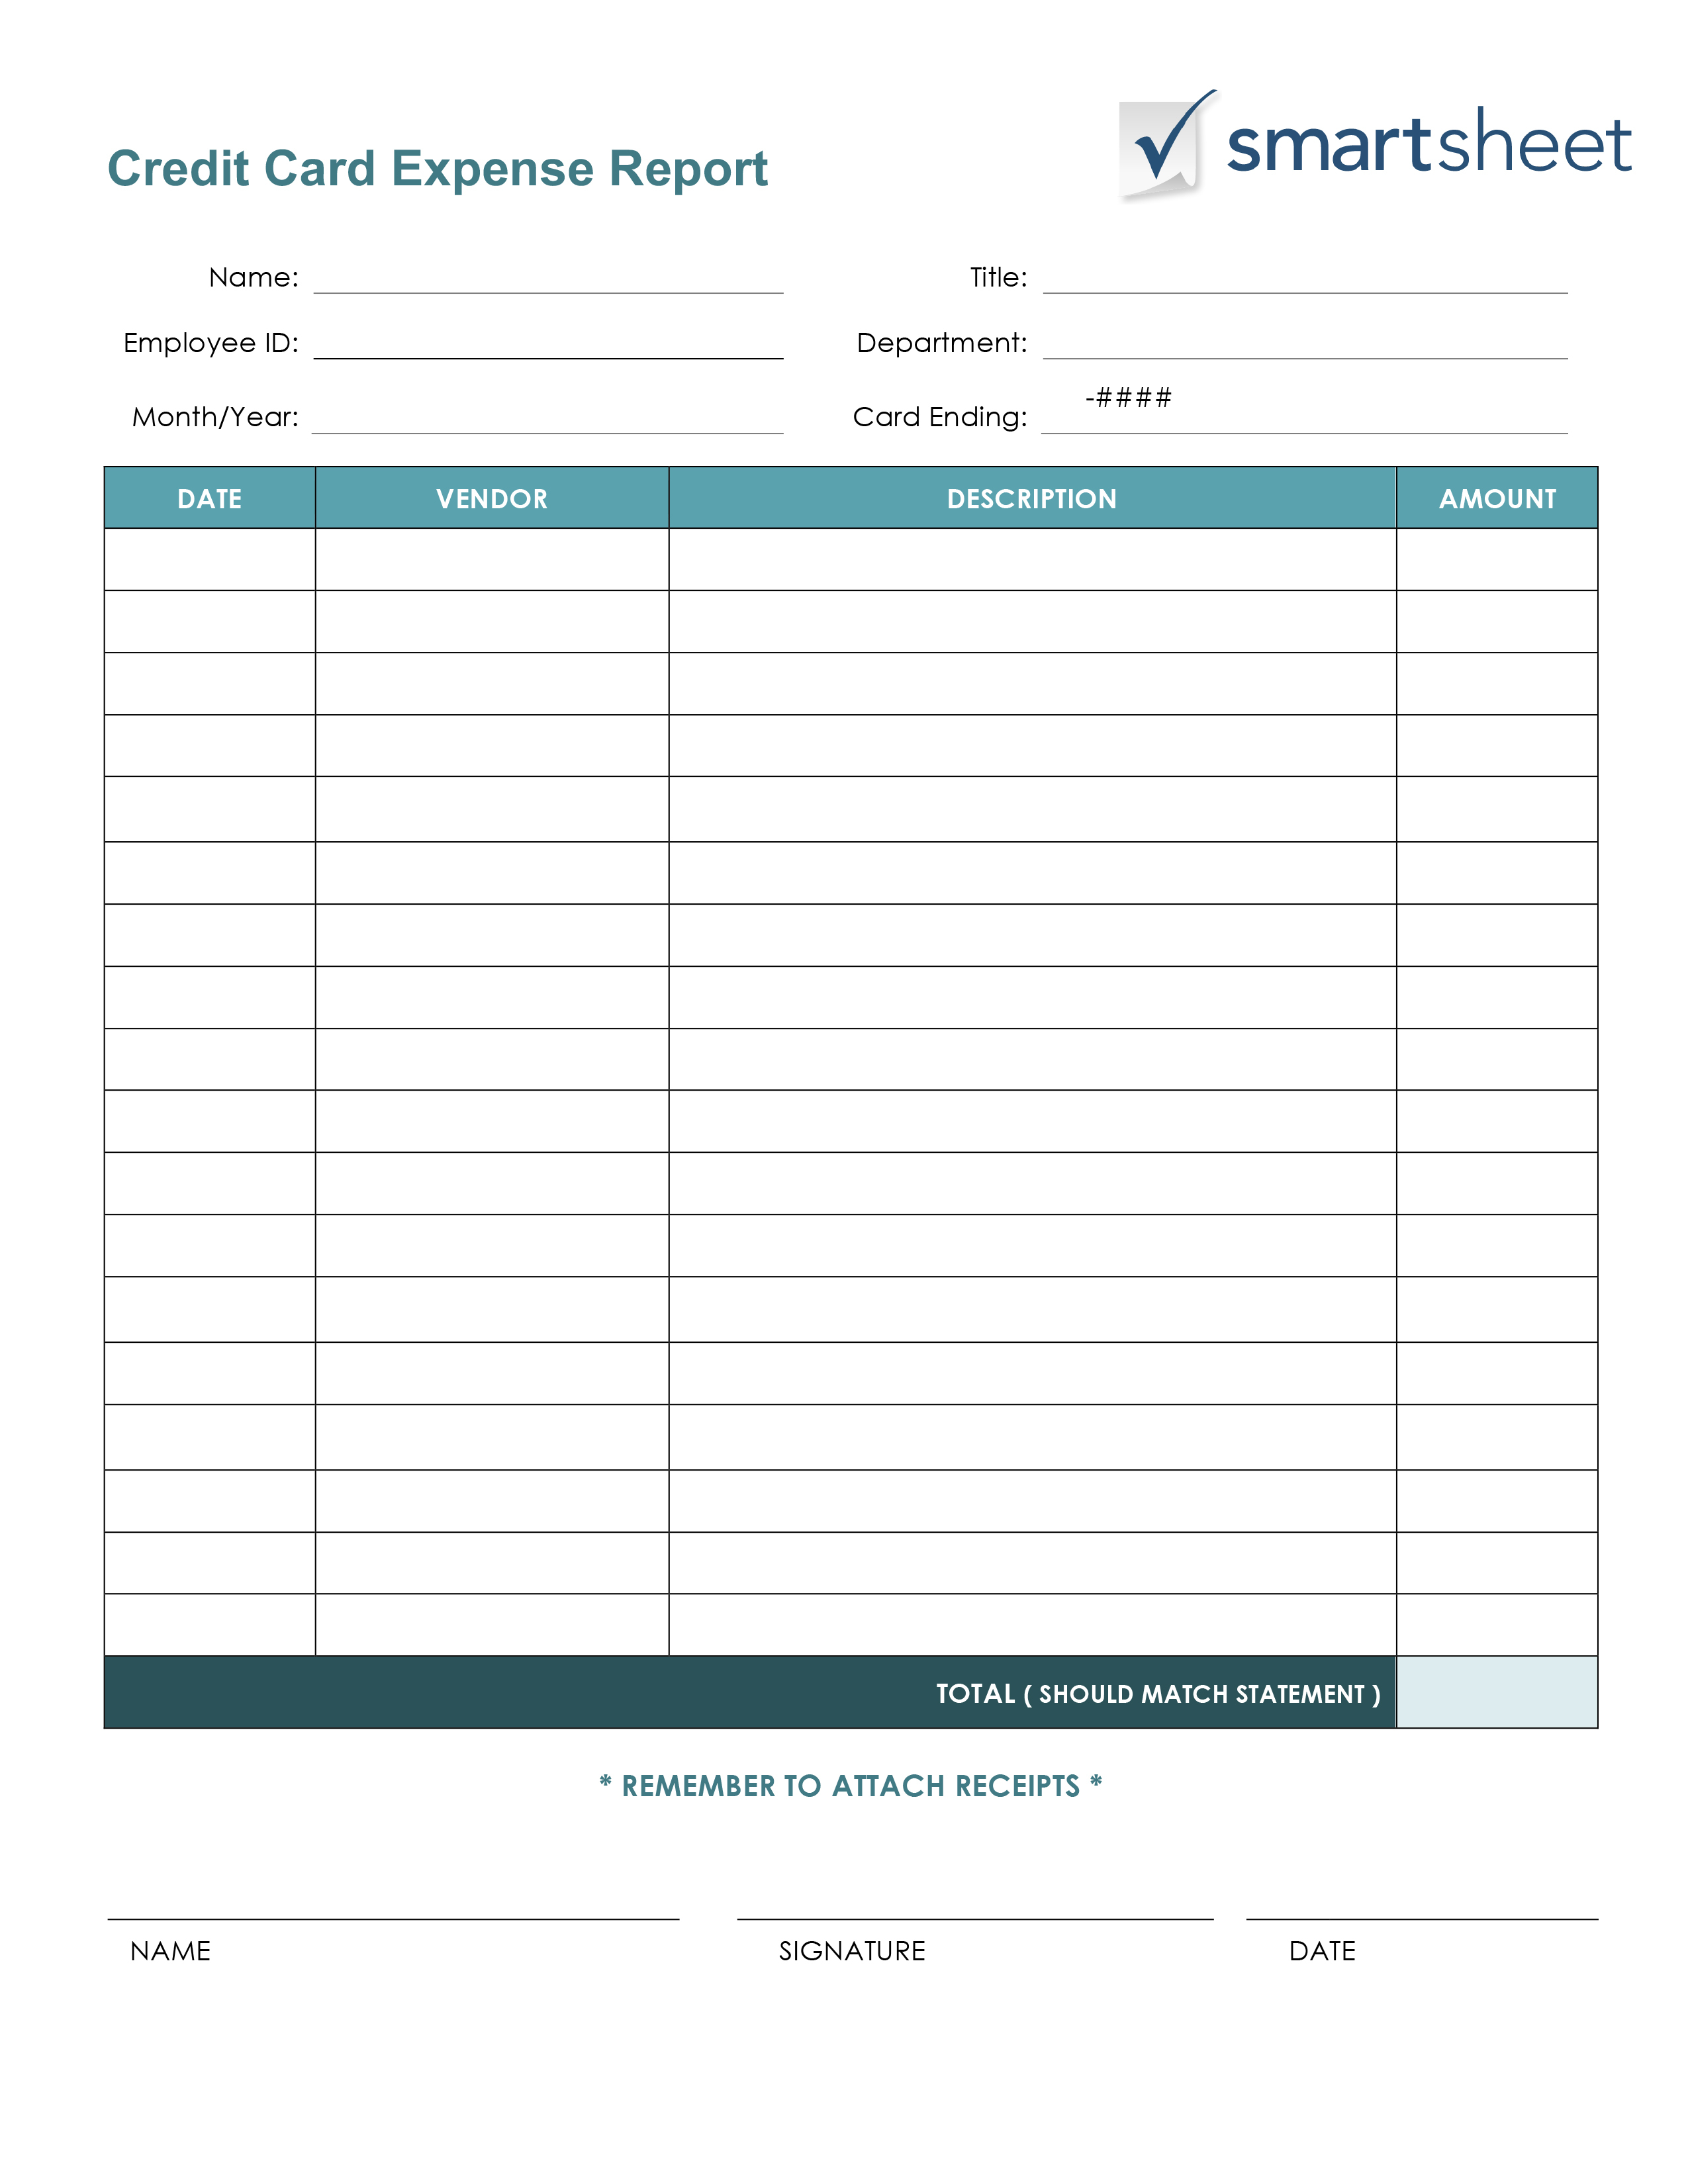 Free Expense Report Templates Smartsheet Throughout Business Expense Template Free